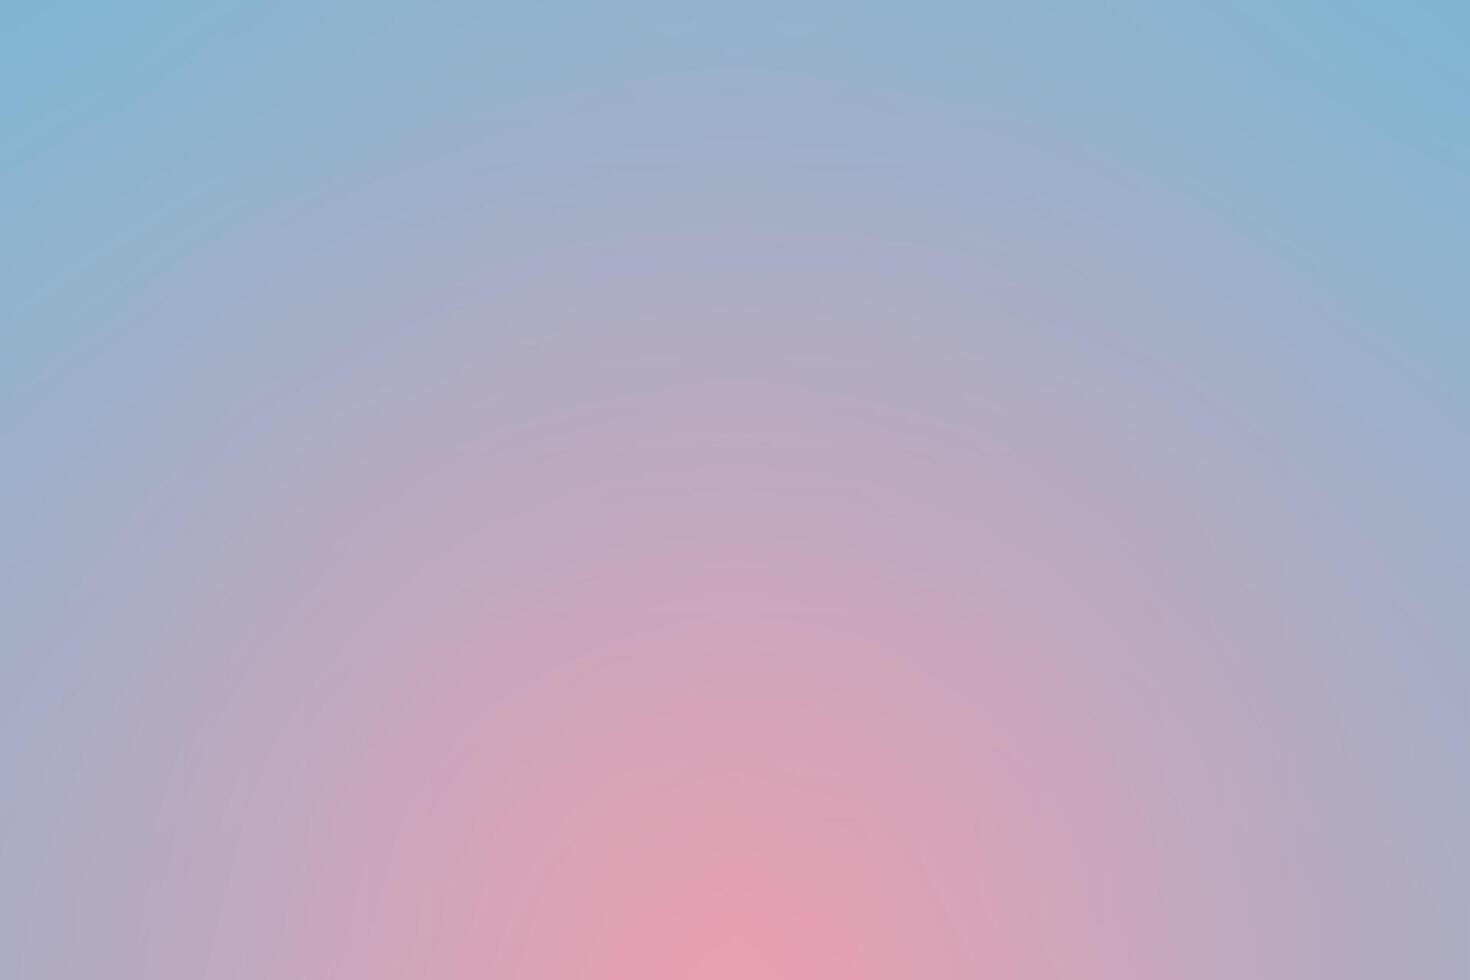 Pink Gradient Background with Blue Accents vector